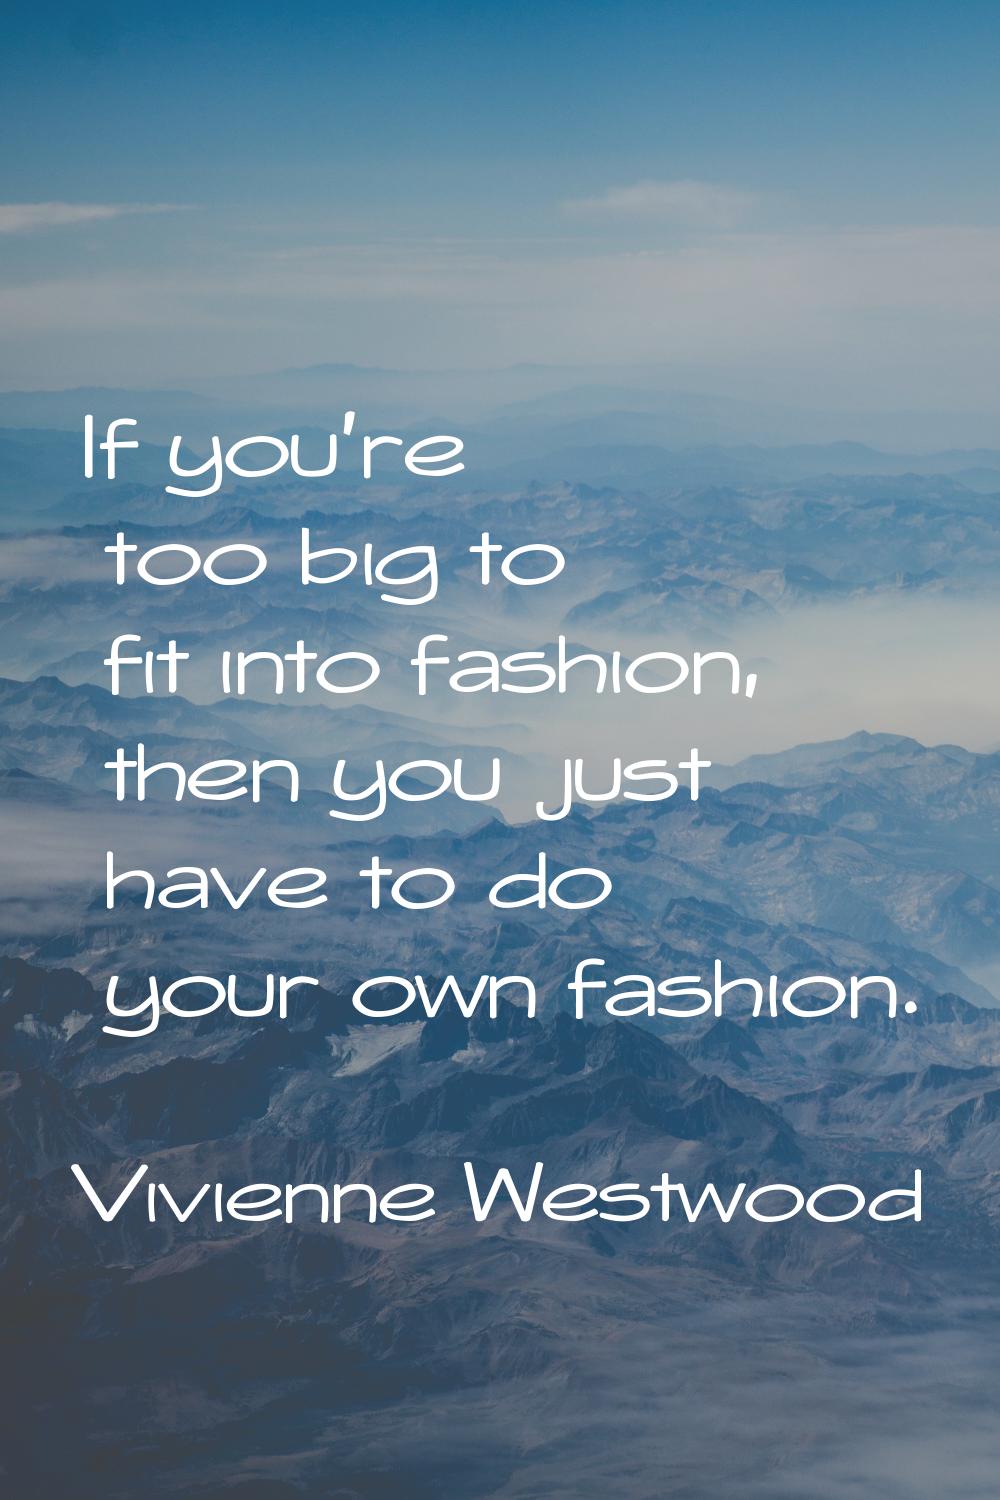 If you're too big to fit into fashion, then you just have to do your own fashion.